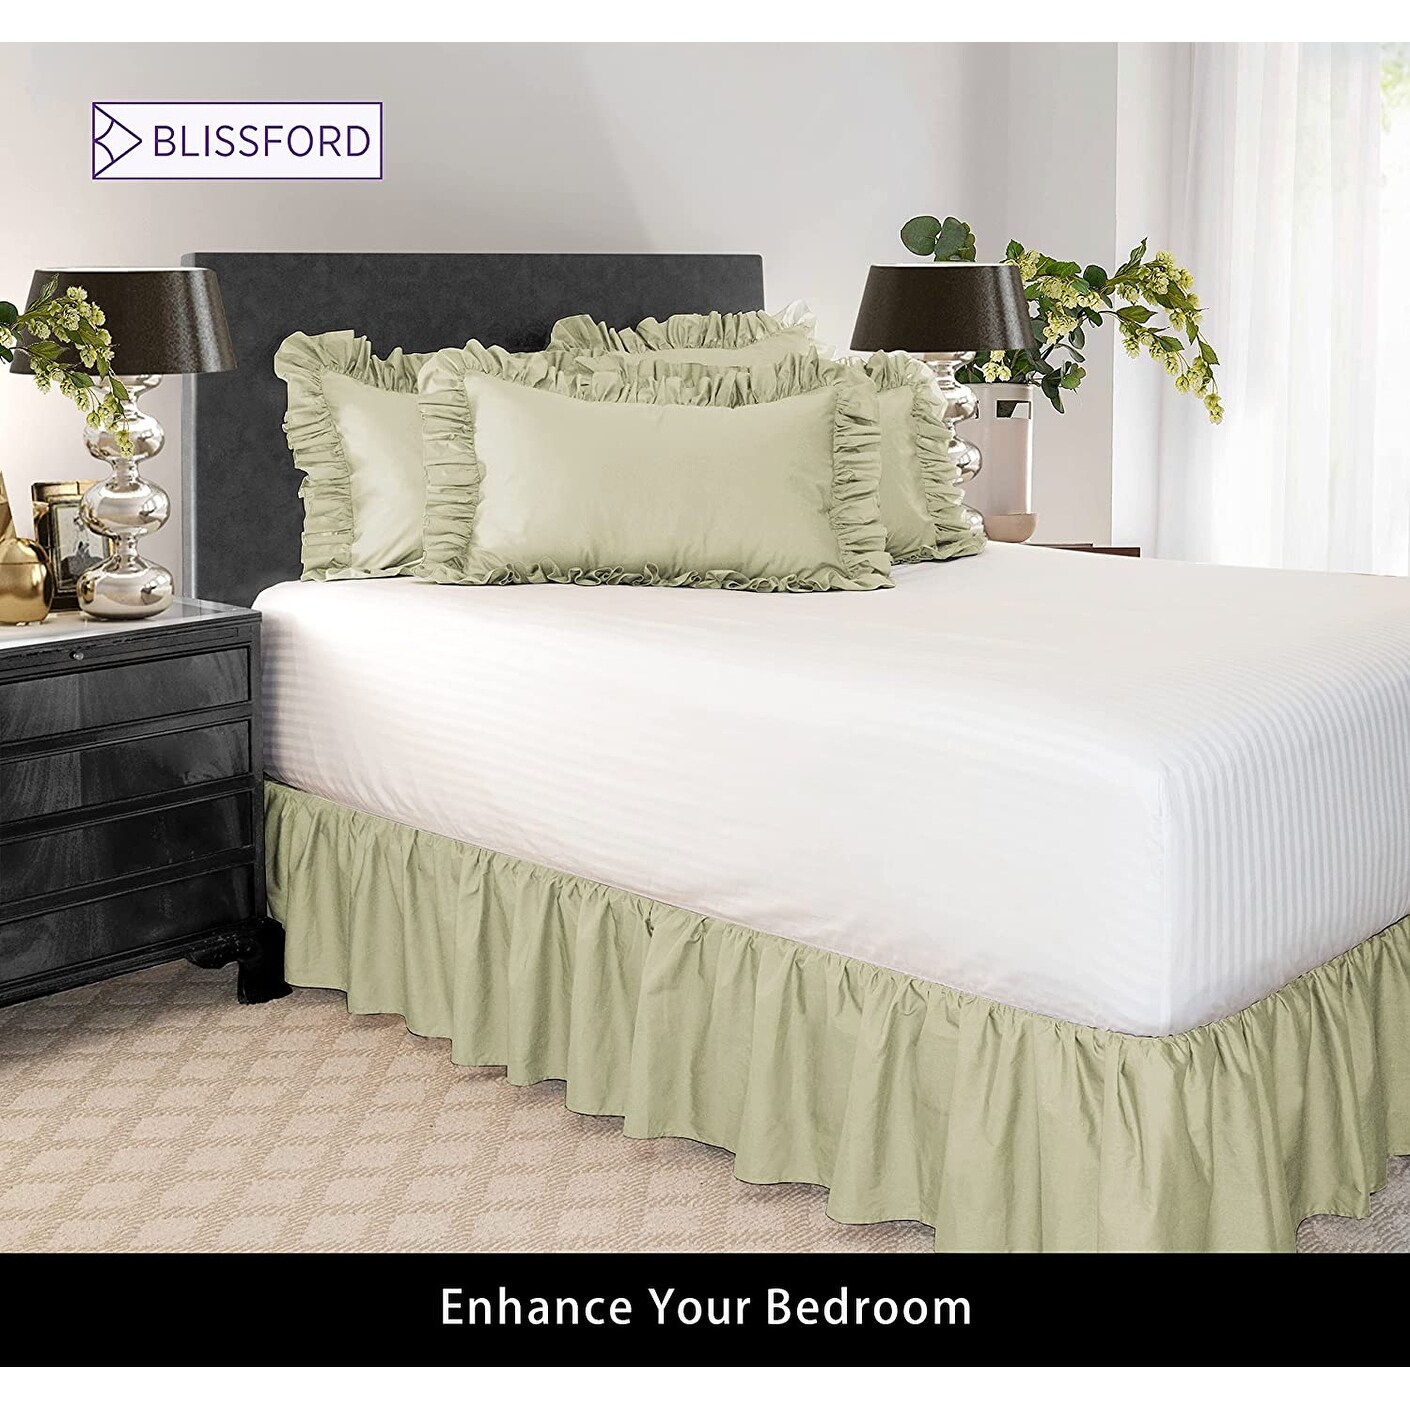 18 Inch Bed Skirts - Bed Bath & Beyond